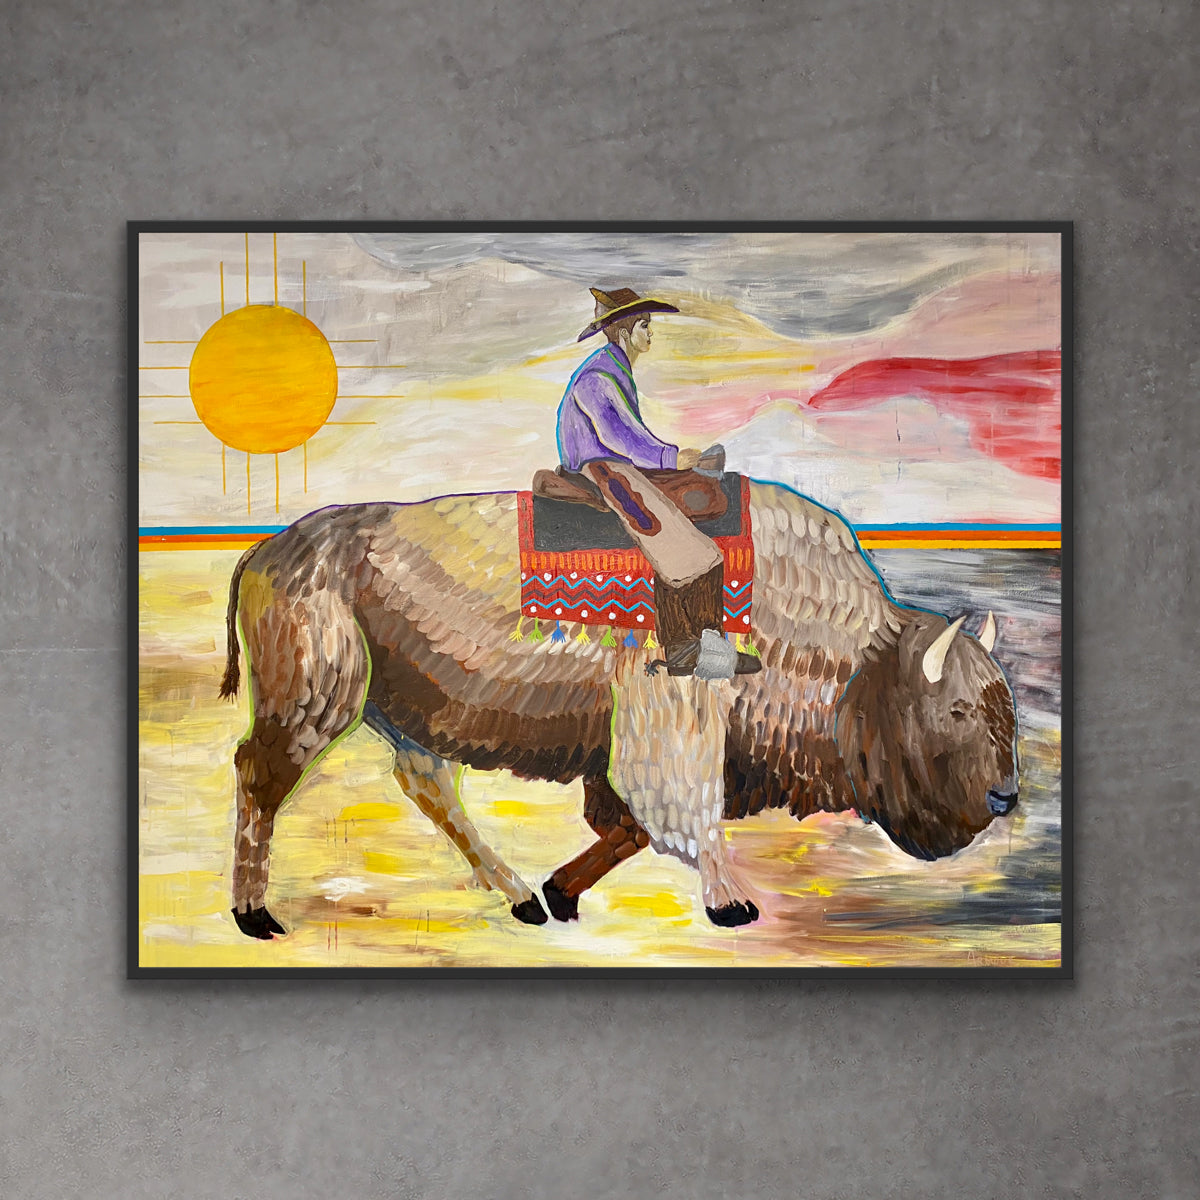 Cowboy and Bison, 48" x 60"